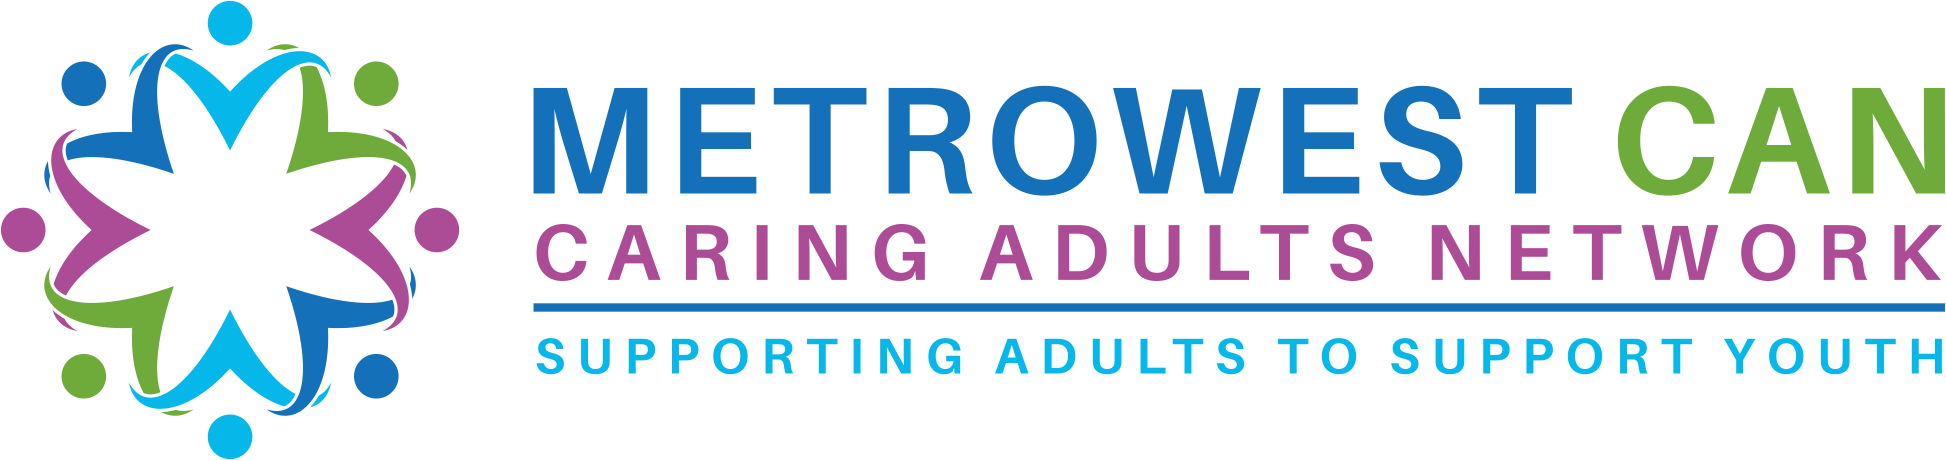 MetroWest Caring Adults Network